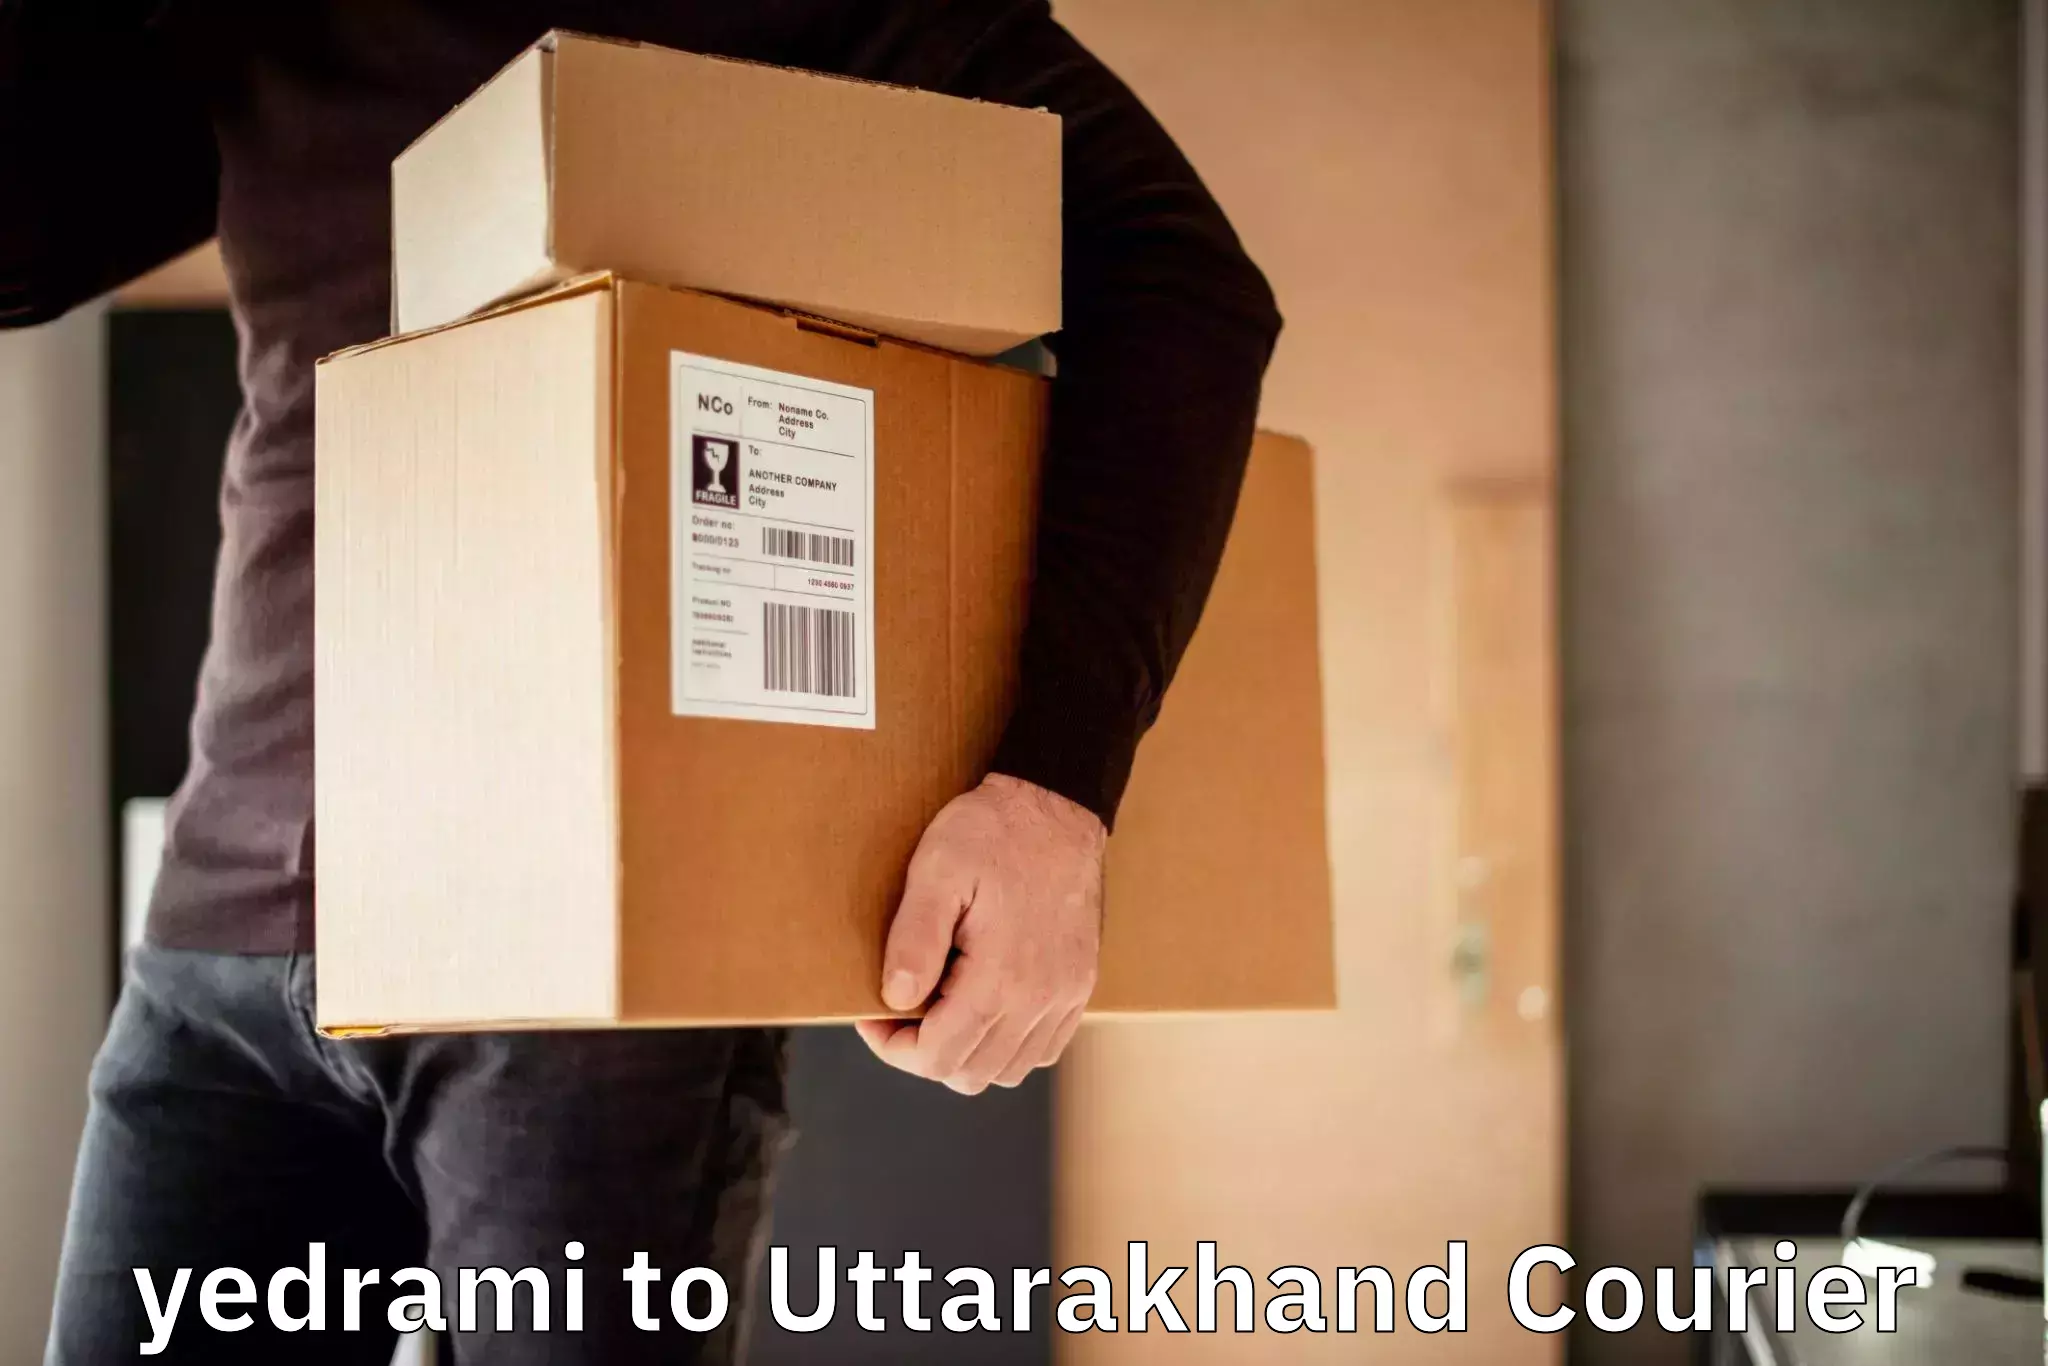 Specialized courier services yedrami to Someshwar